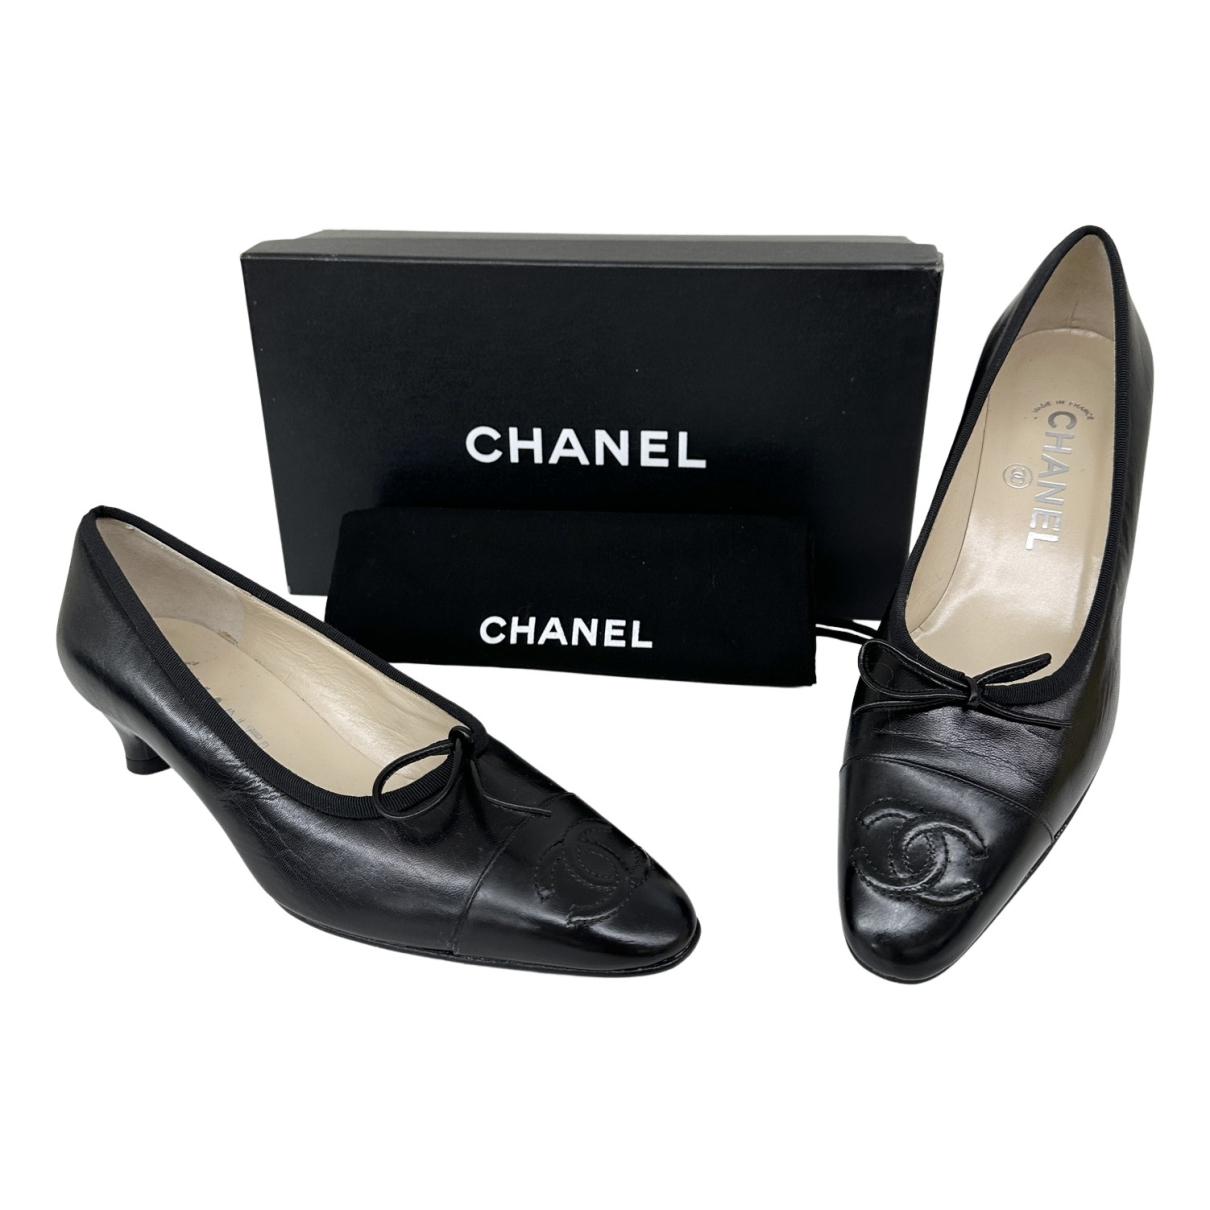 Authentic black Chanel Loafers  Chanel loafers, Chanel shoes, Chanel shoes  flats